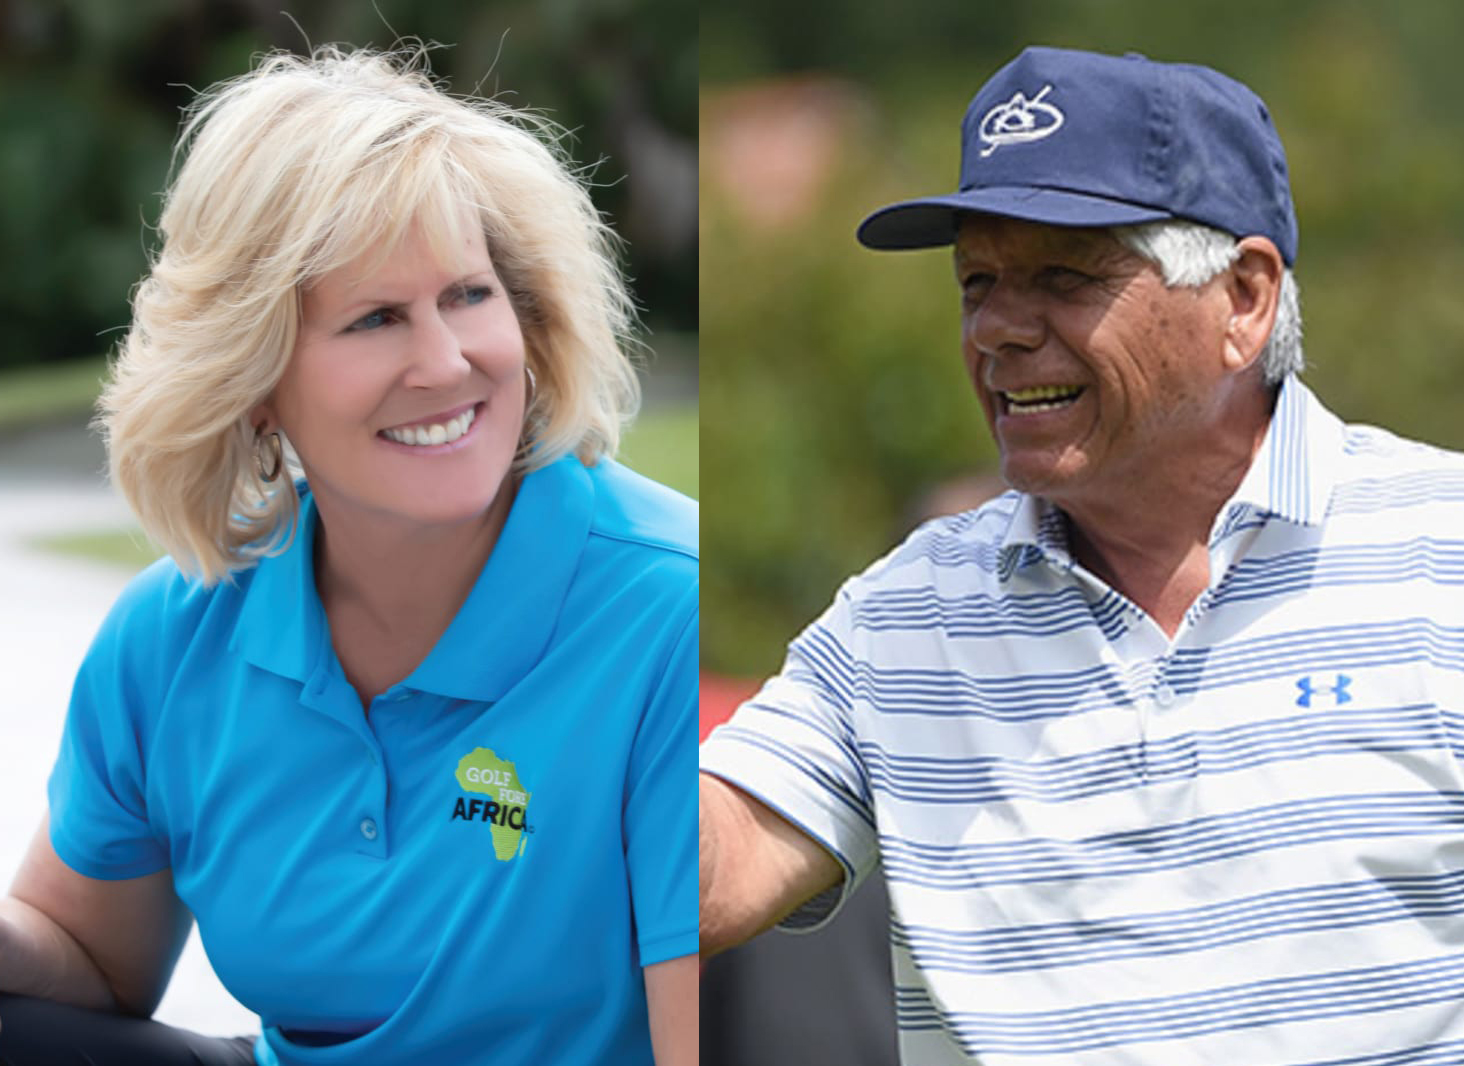 Lee Treviño & Betsy King: The Merry Mex and the 1980s Star